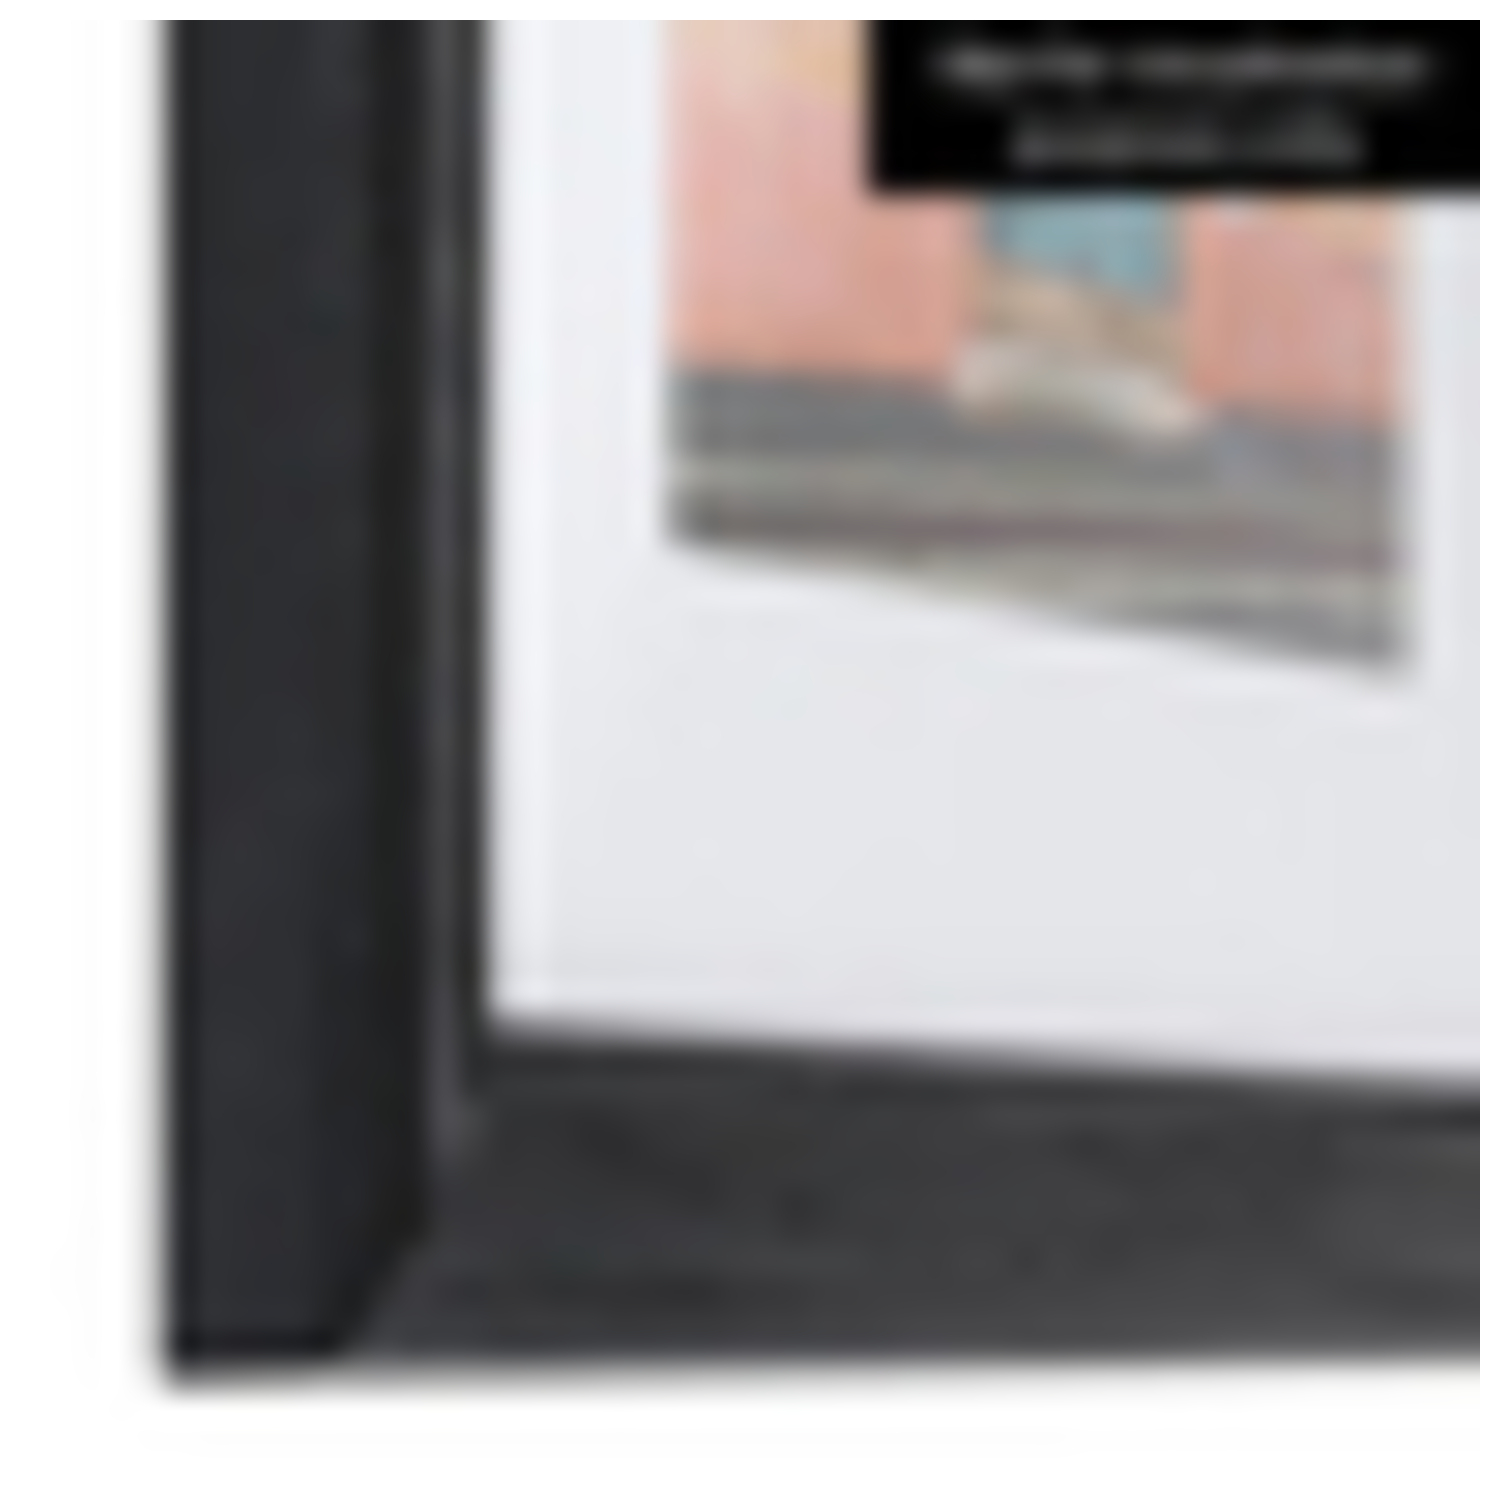 Mainstays 24x30 Wide Gallery Poster and Picture Frame, Black - NEW